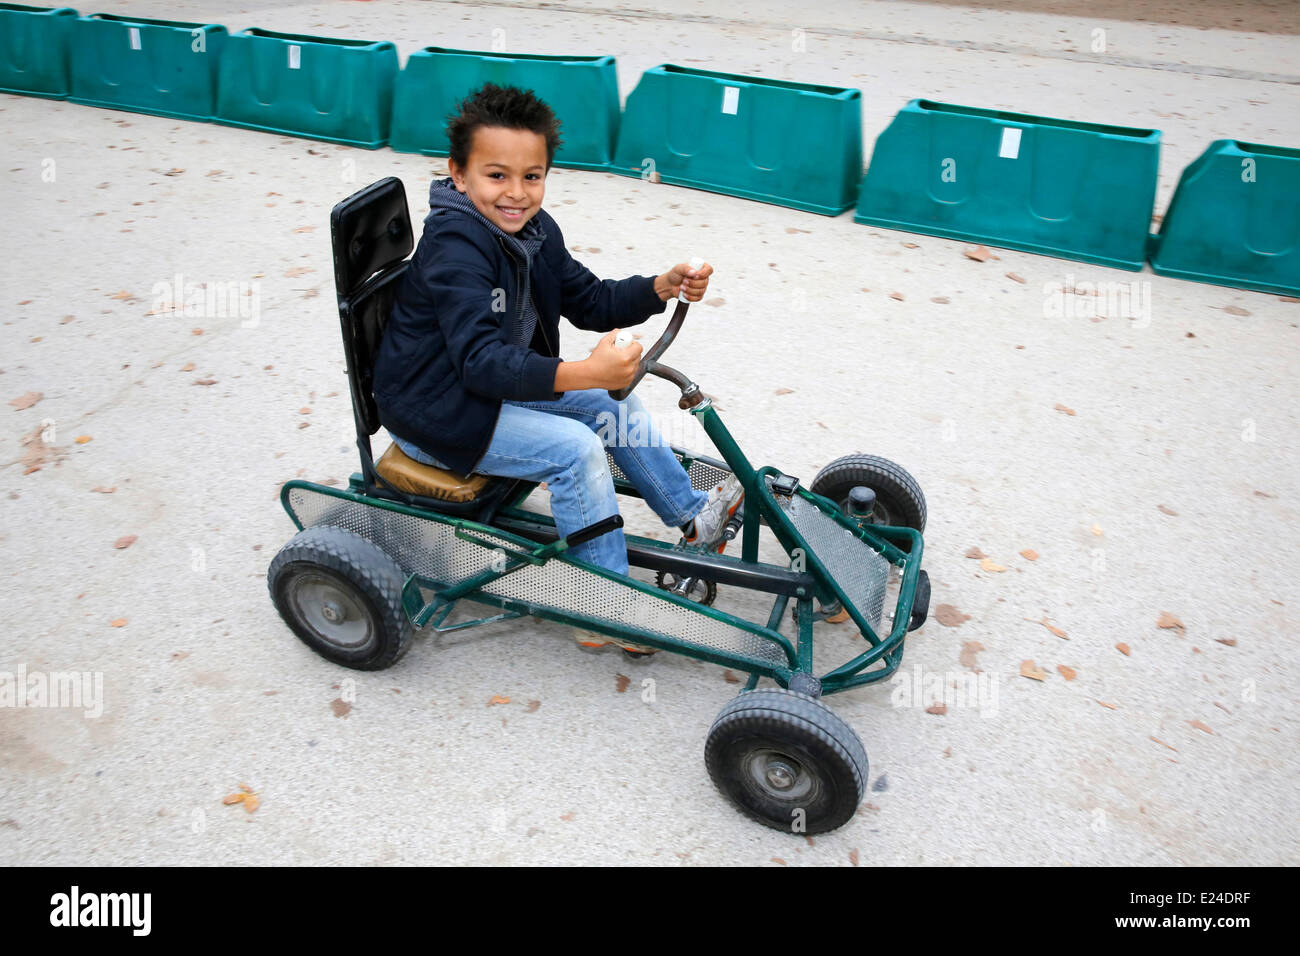 8-year-old boy riding a kart Stock Photo